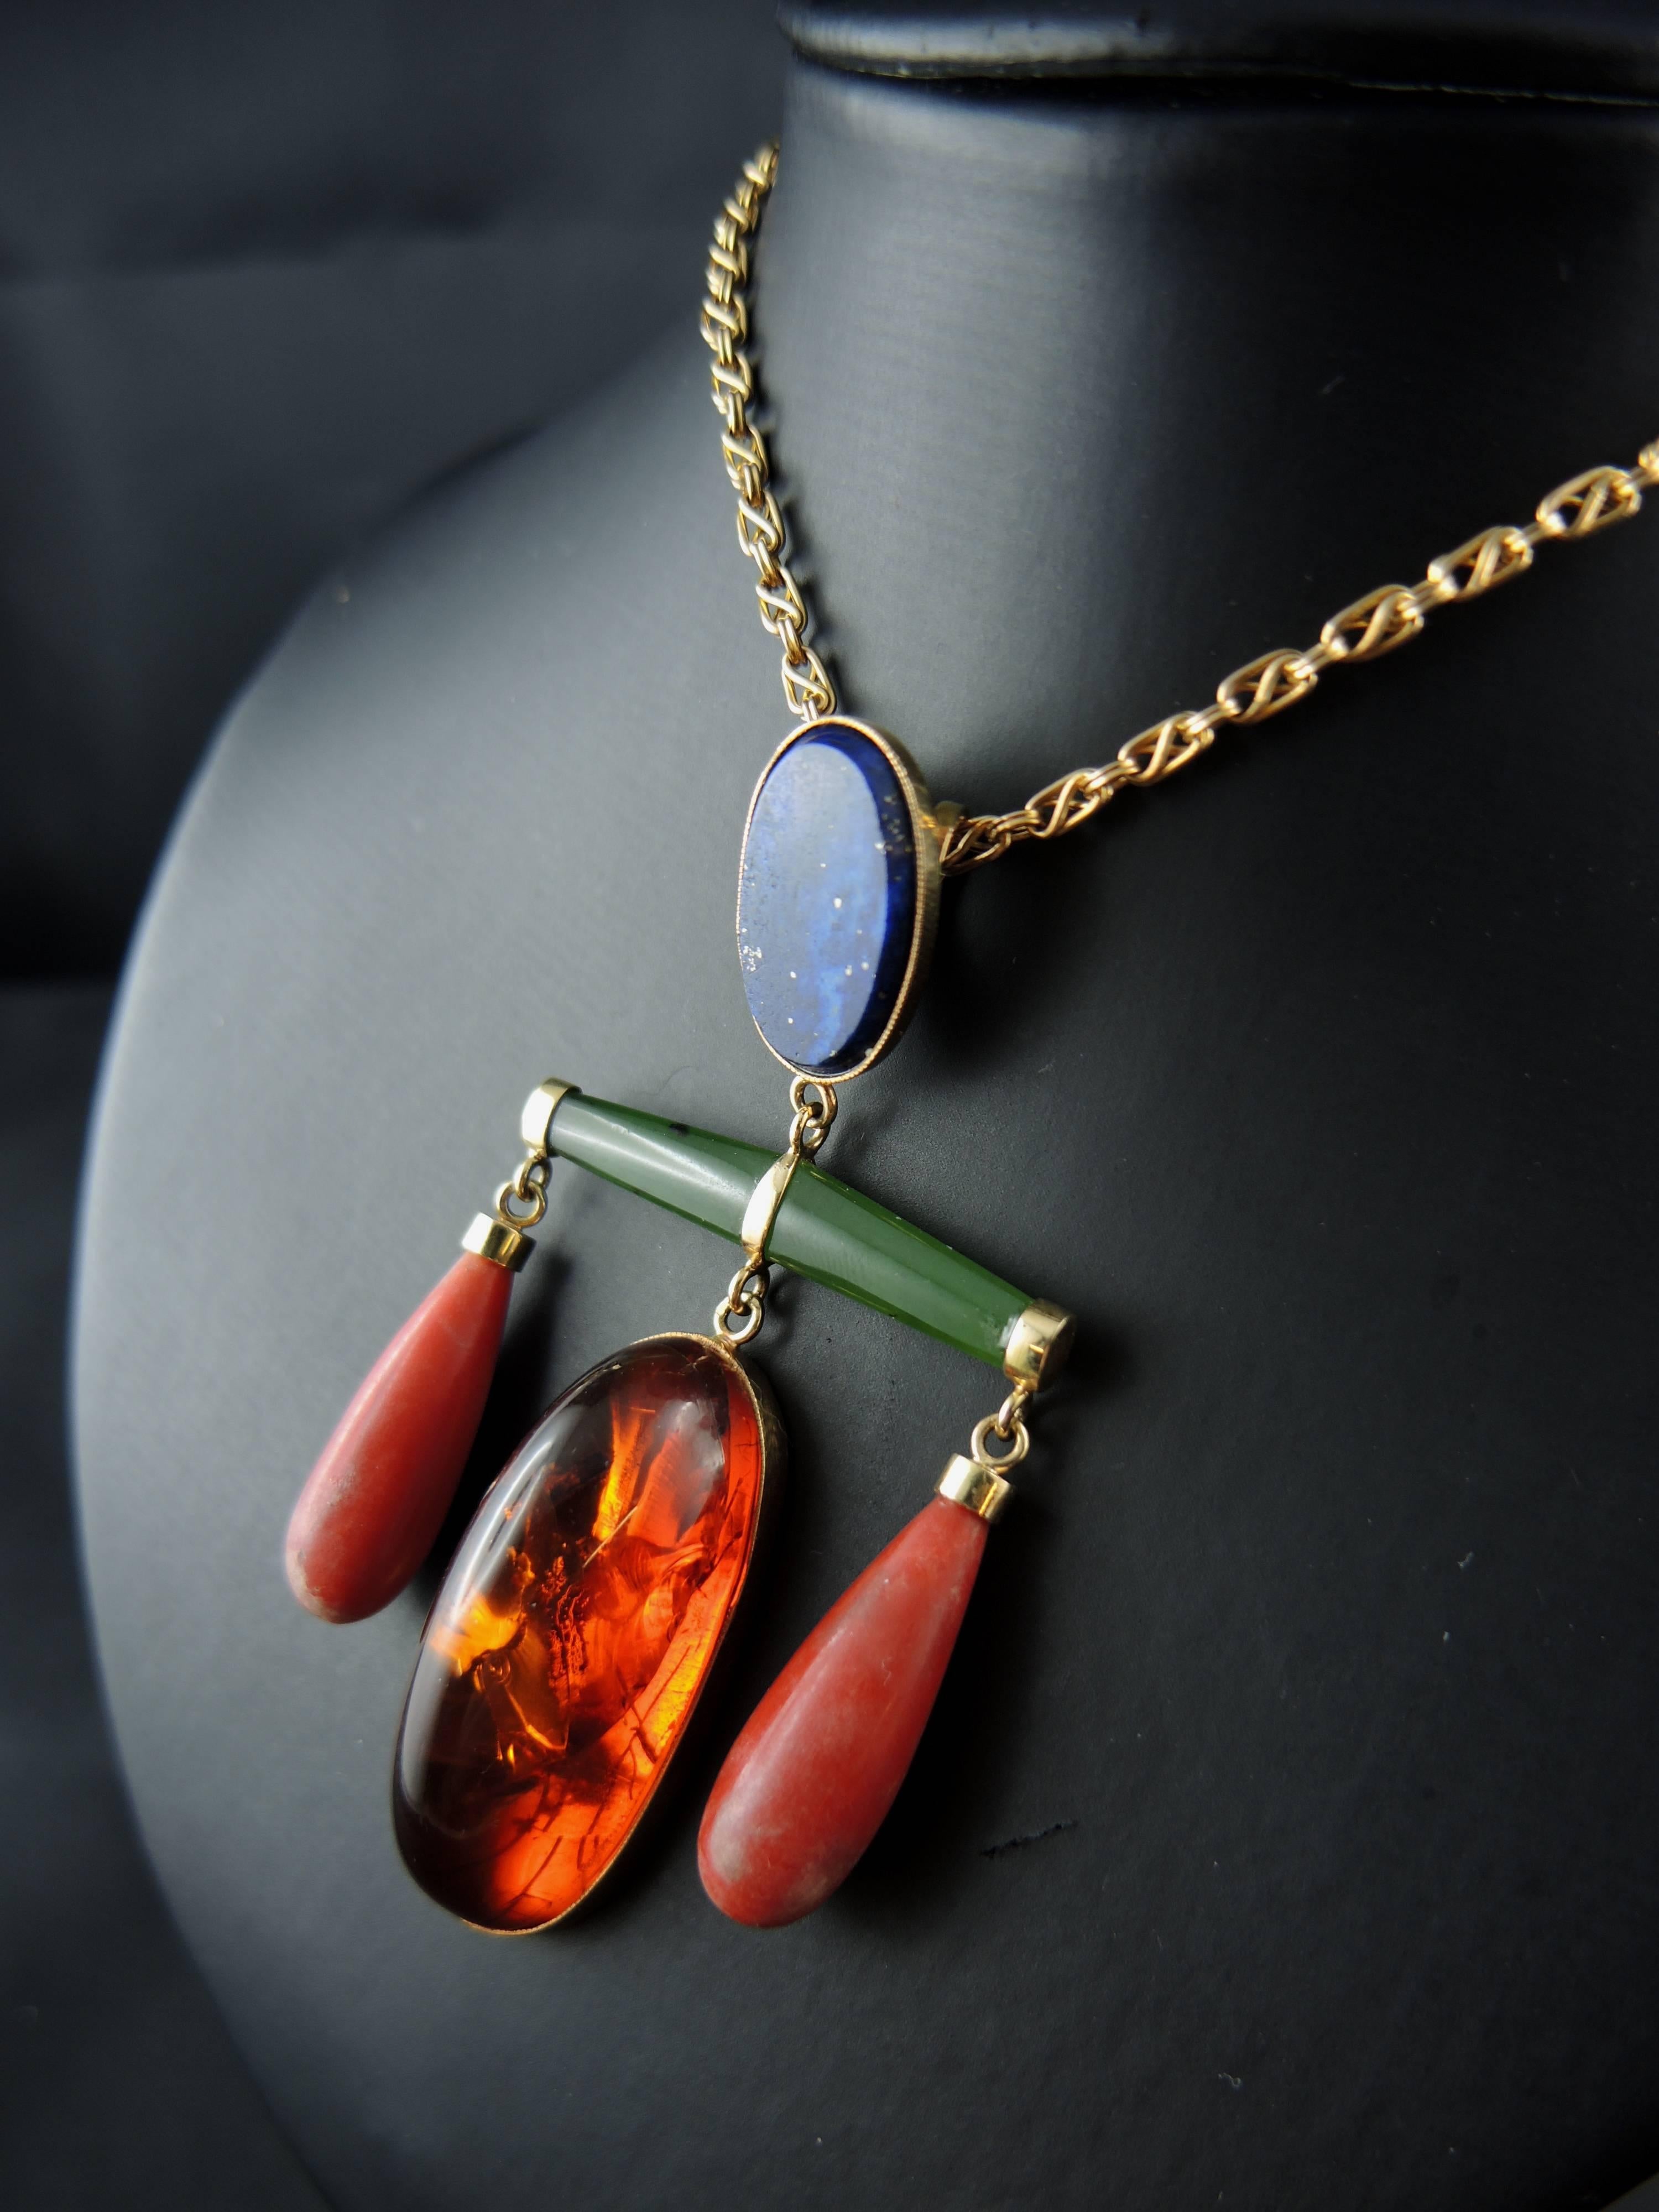 Women's French Modernist Pendant with Lapis Lazuli, Amber, Coral and Jade, circa 1960